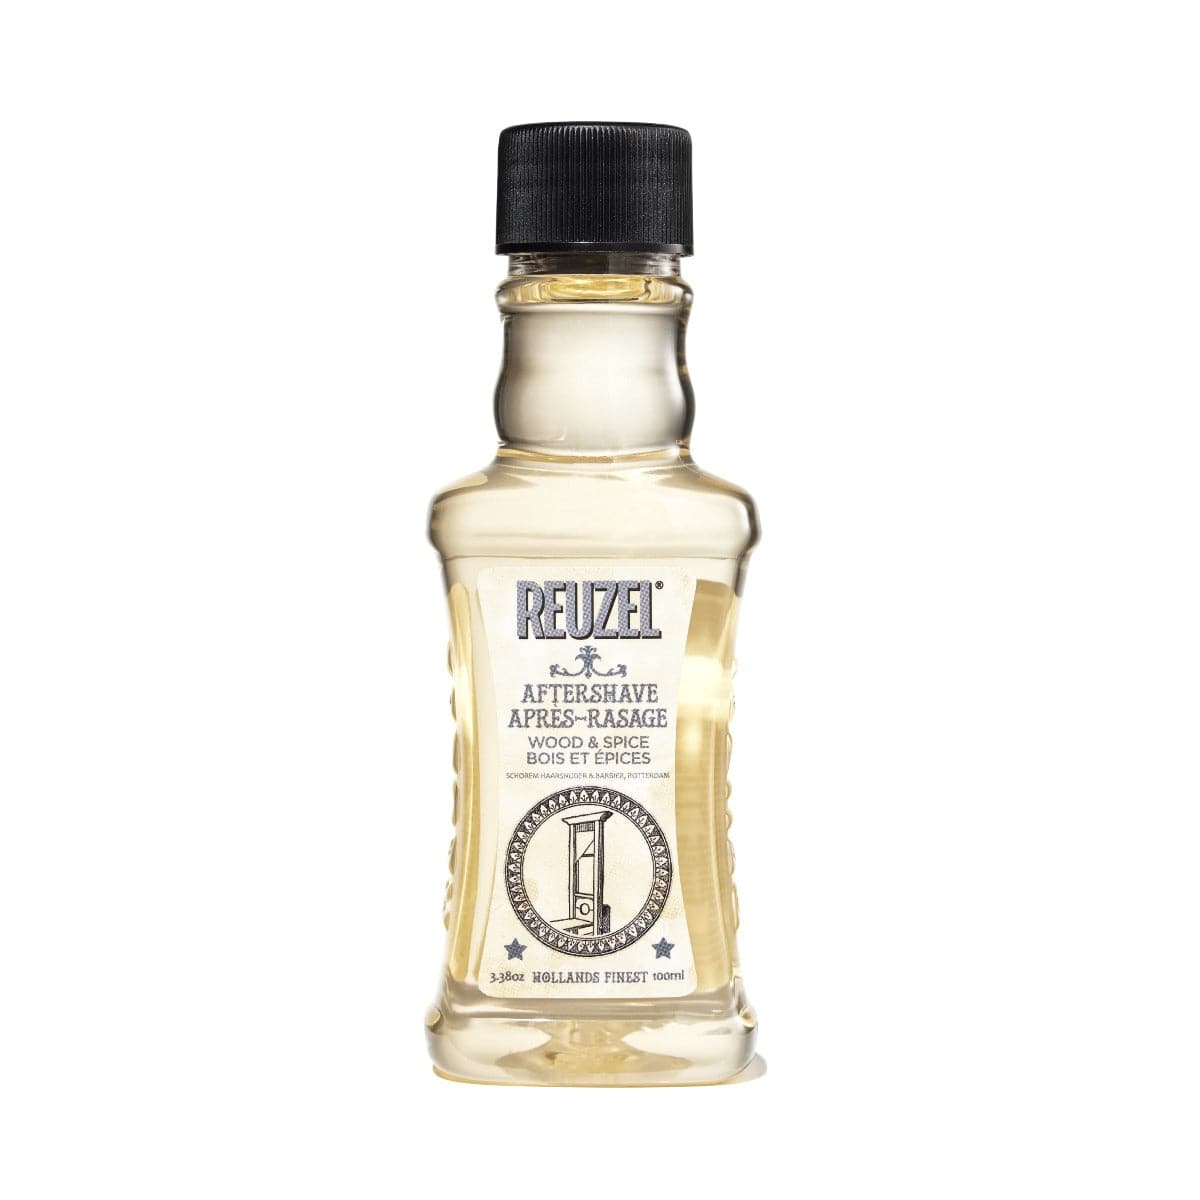 REUZEL_After-Shave - Wood & Spice 100ml / 3.38oz_Cosmetic World